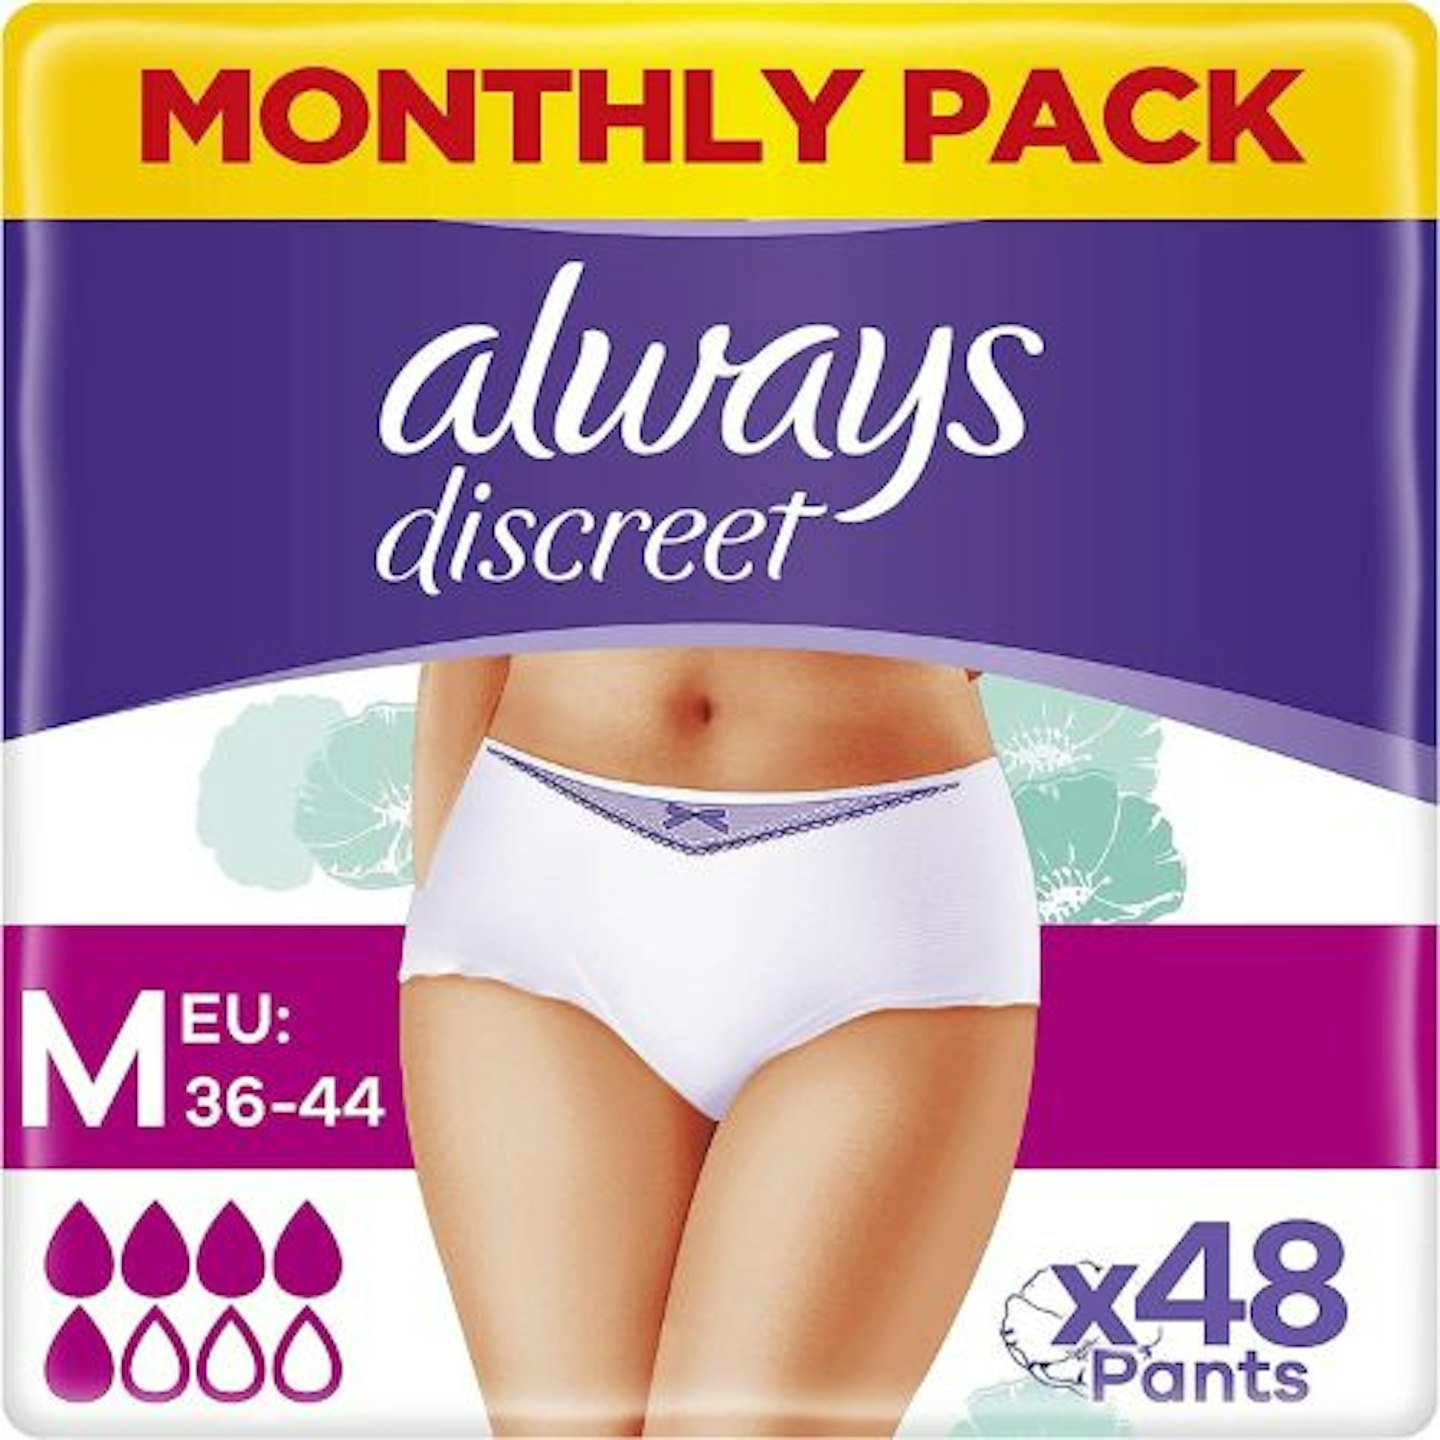 Best Incontinence Pads for Sensitive Skin